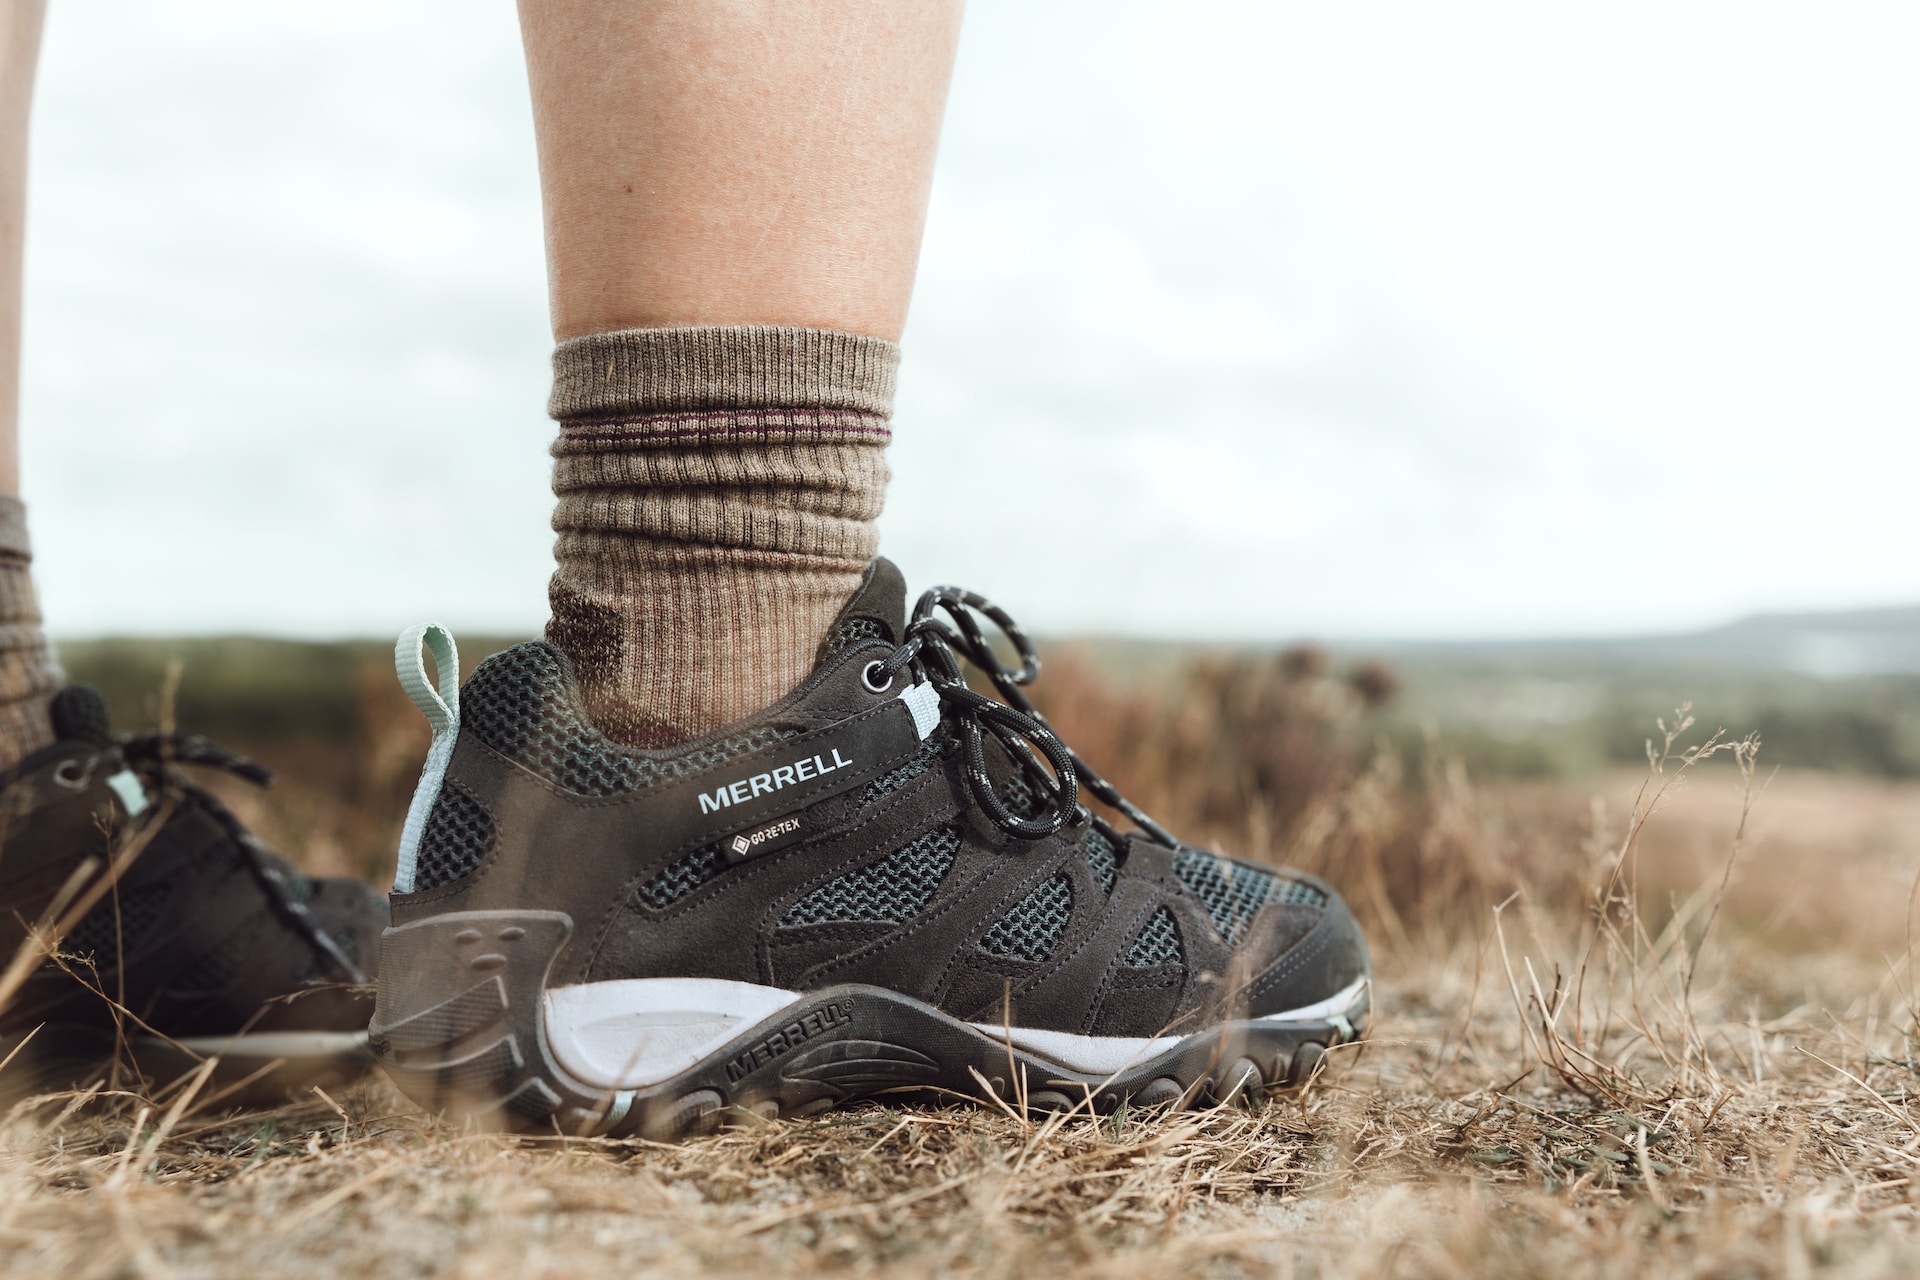 How Are Hiking Boots Different From Sneakers?